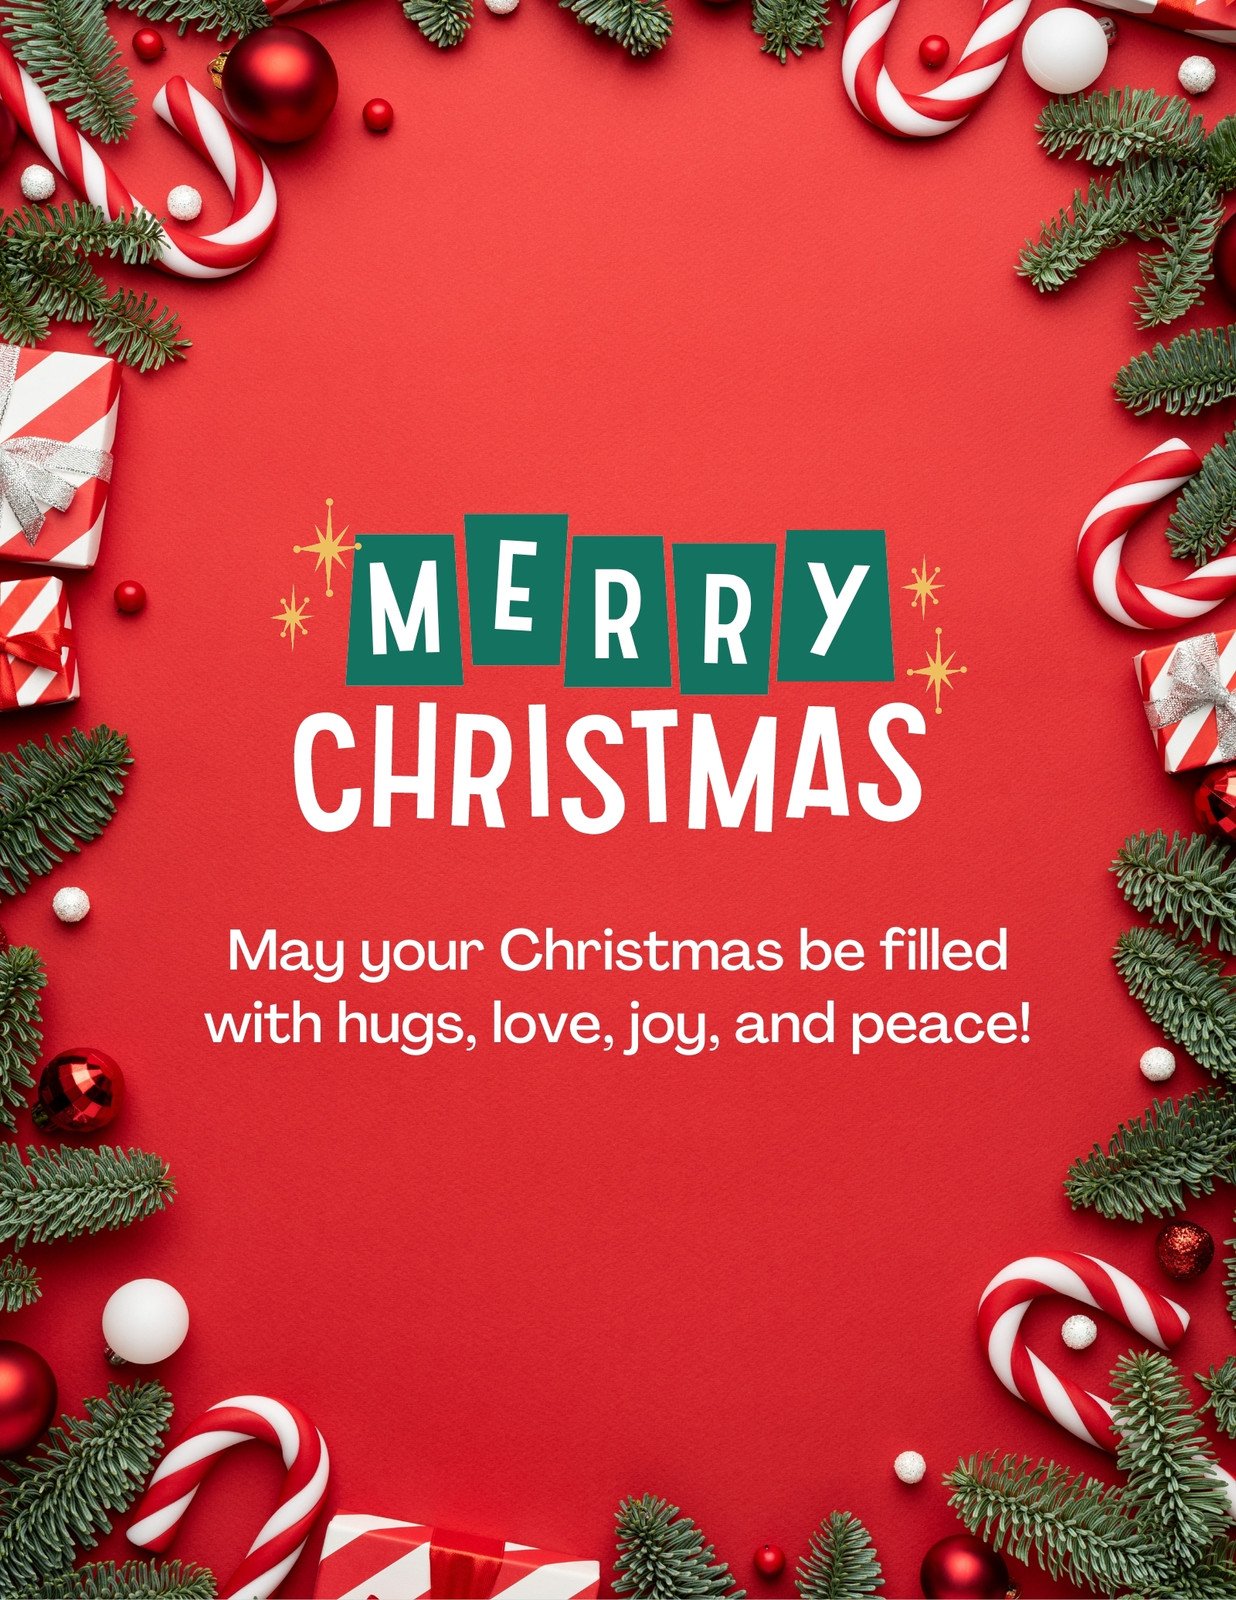 merry christmas wishes images free